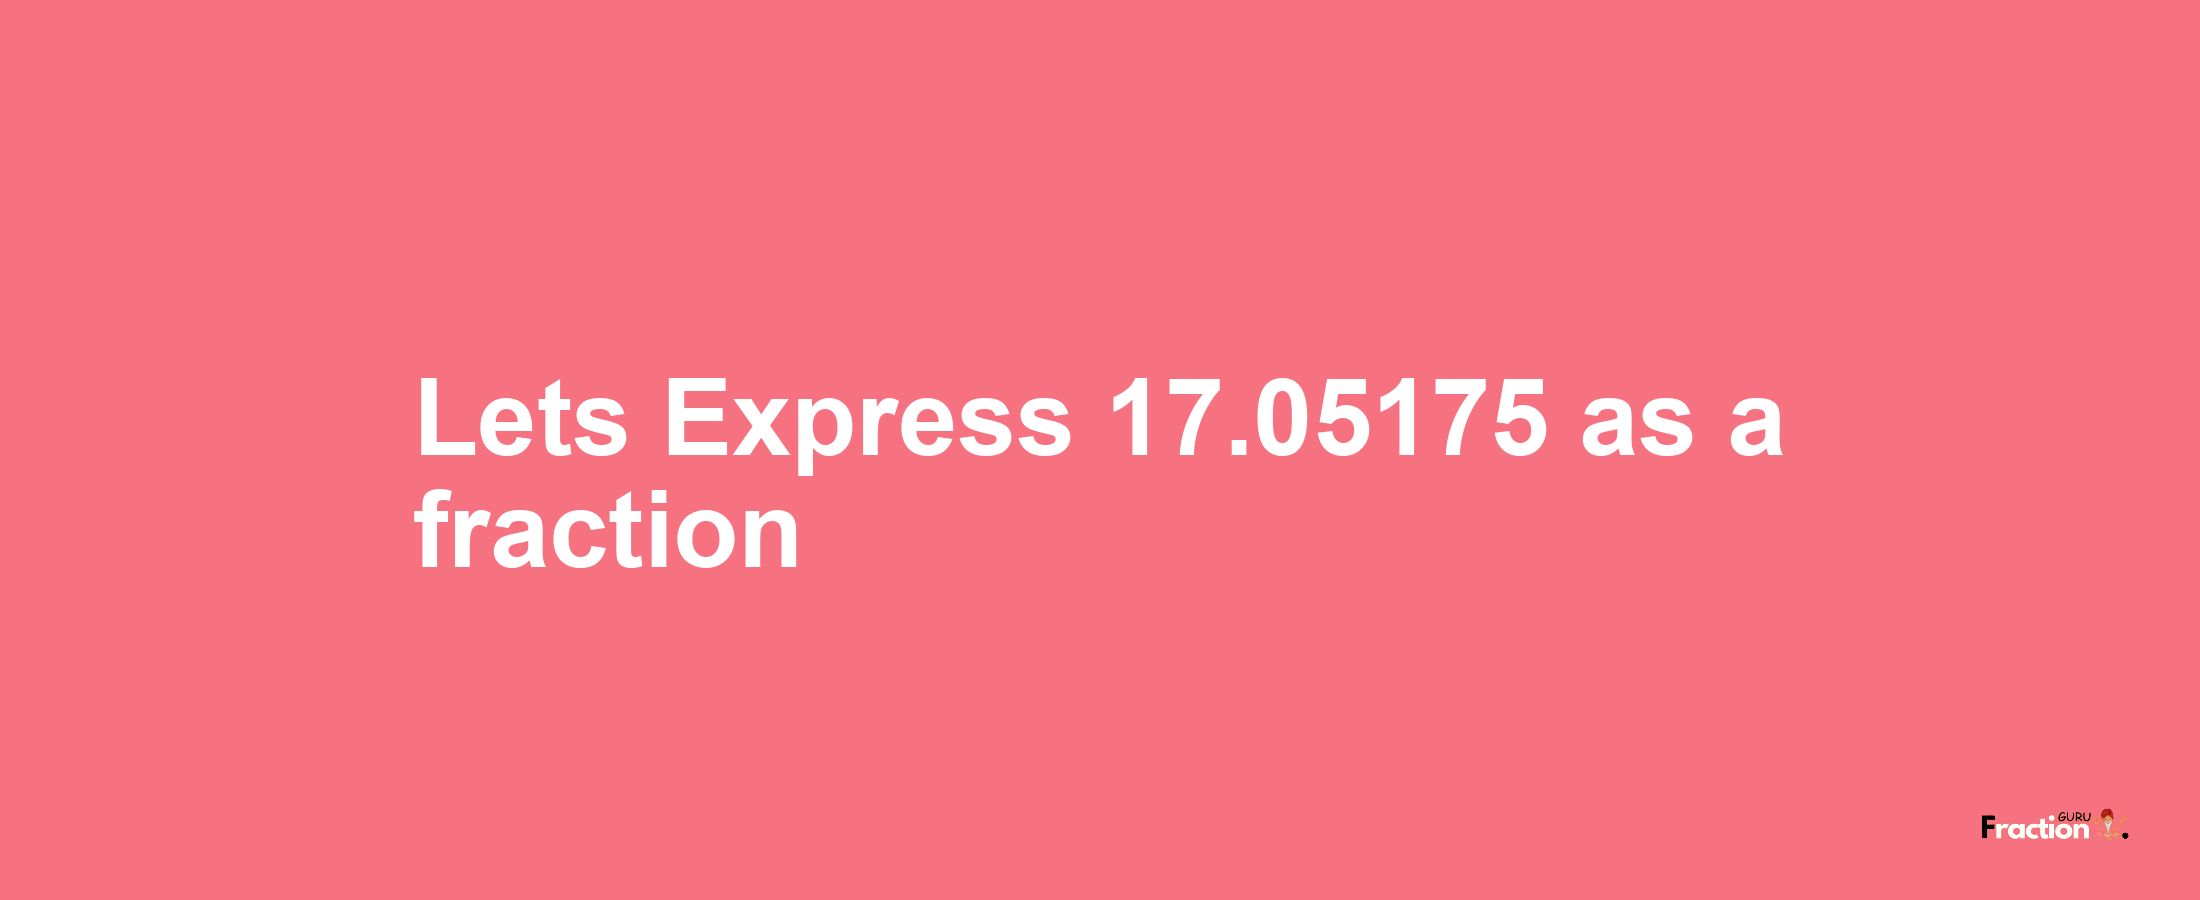 Lets Express 17.05175 as afraction